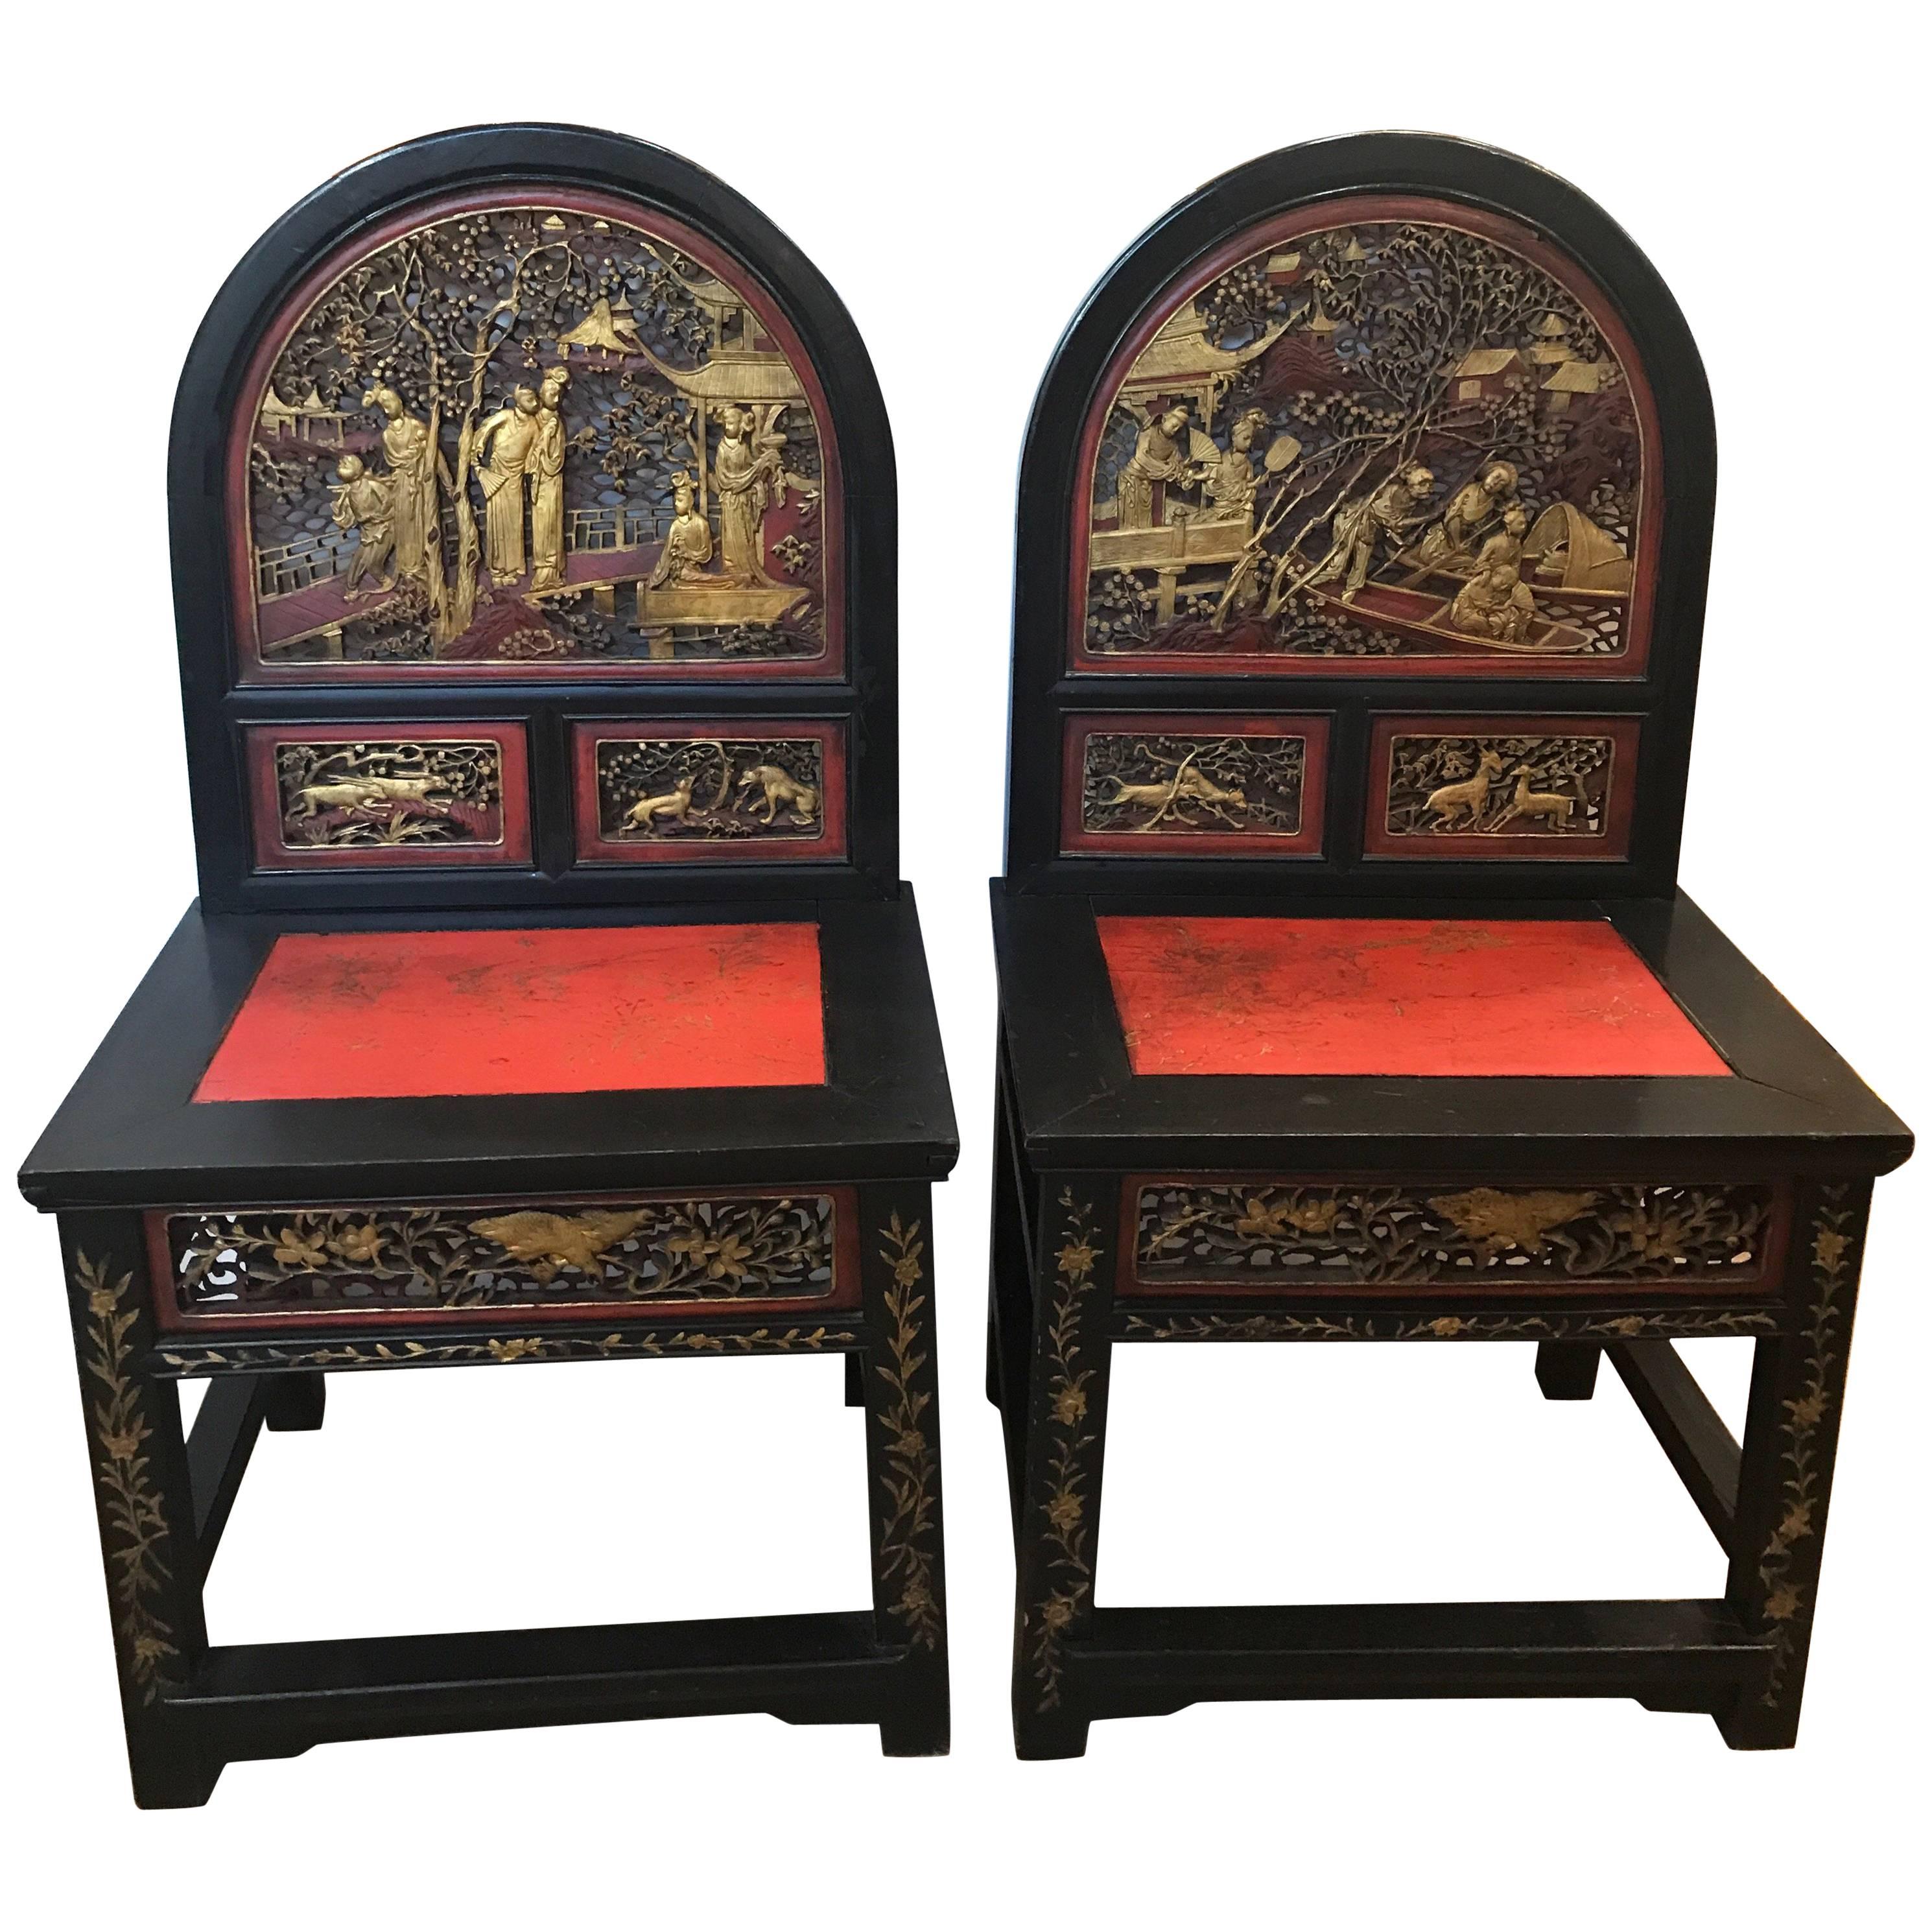 Pair of Chinese Ancestral Chairs